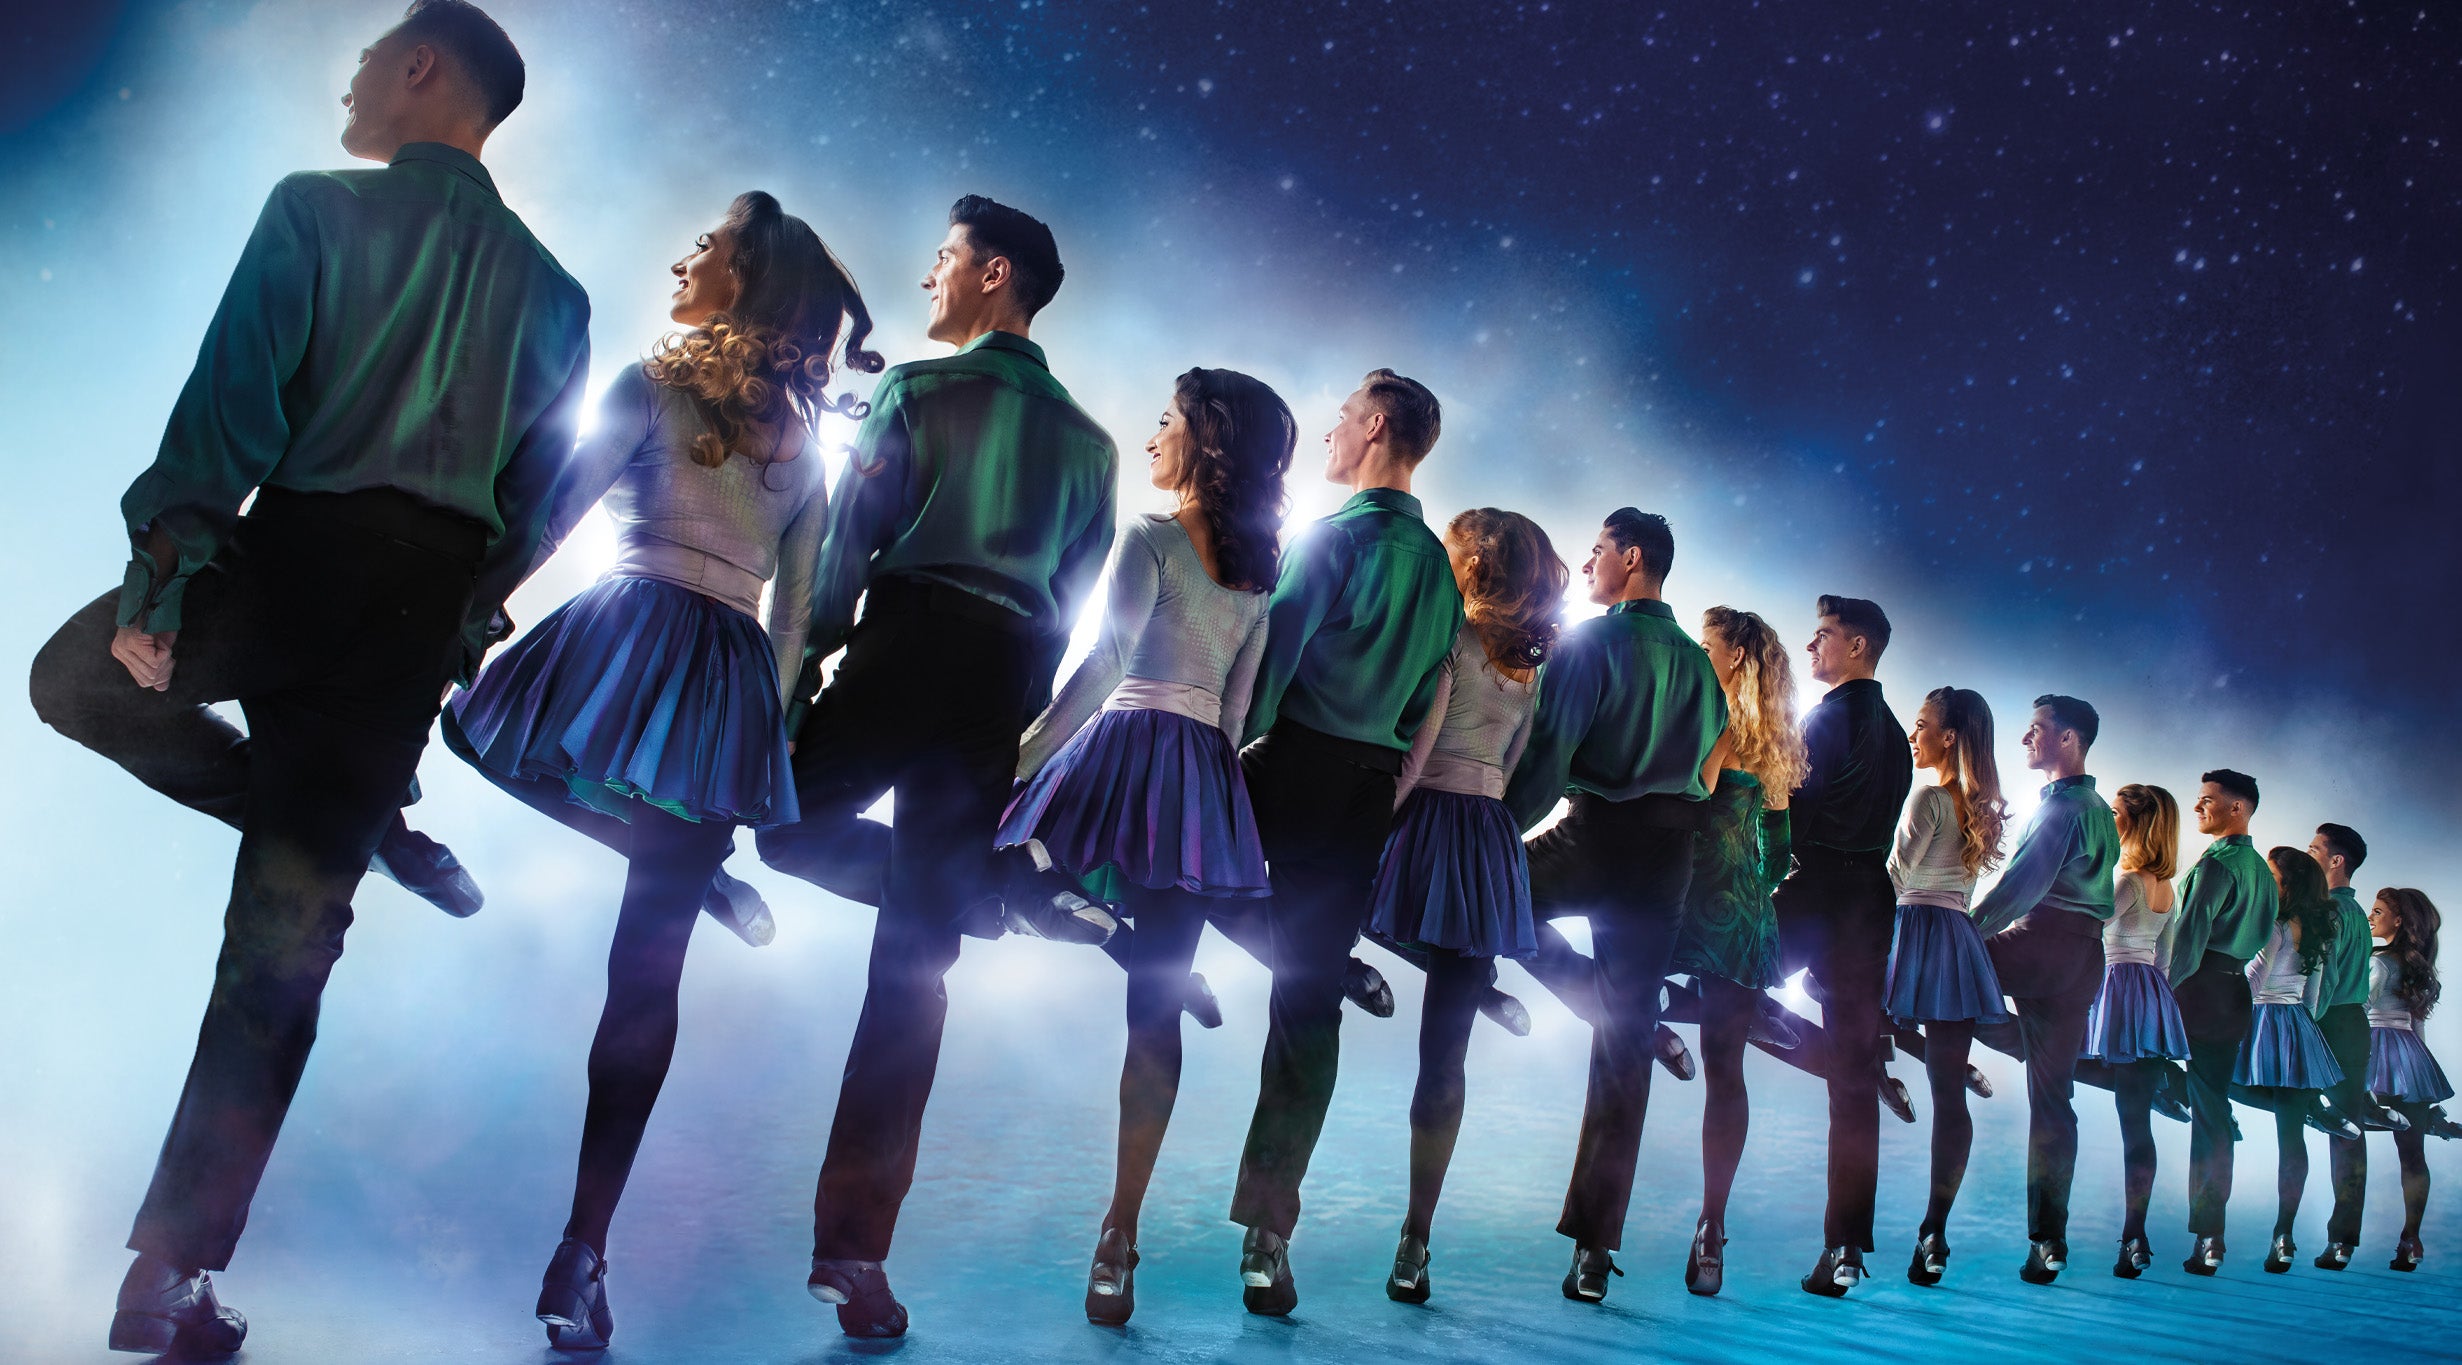 Riverdance 30 - The New Generation pre-sale password for early tickets in London